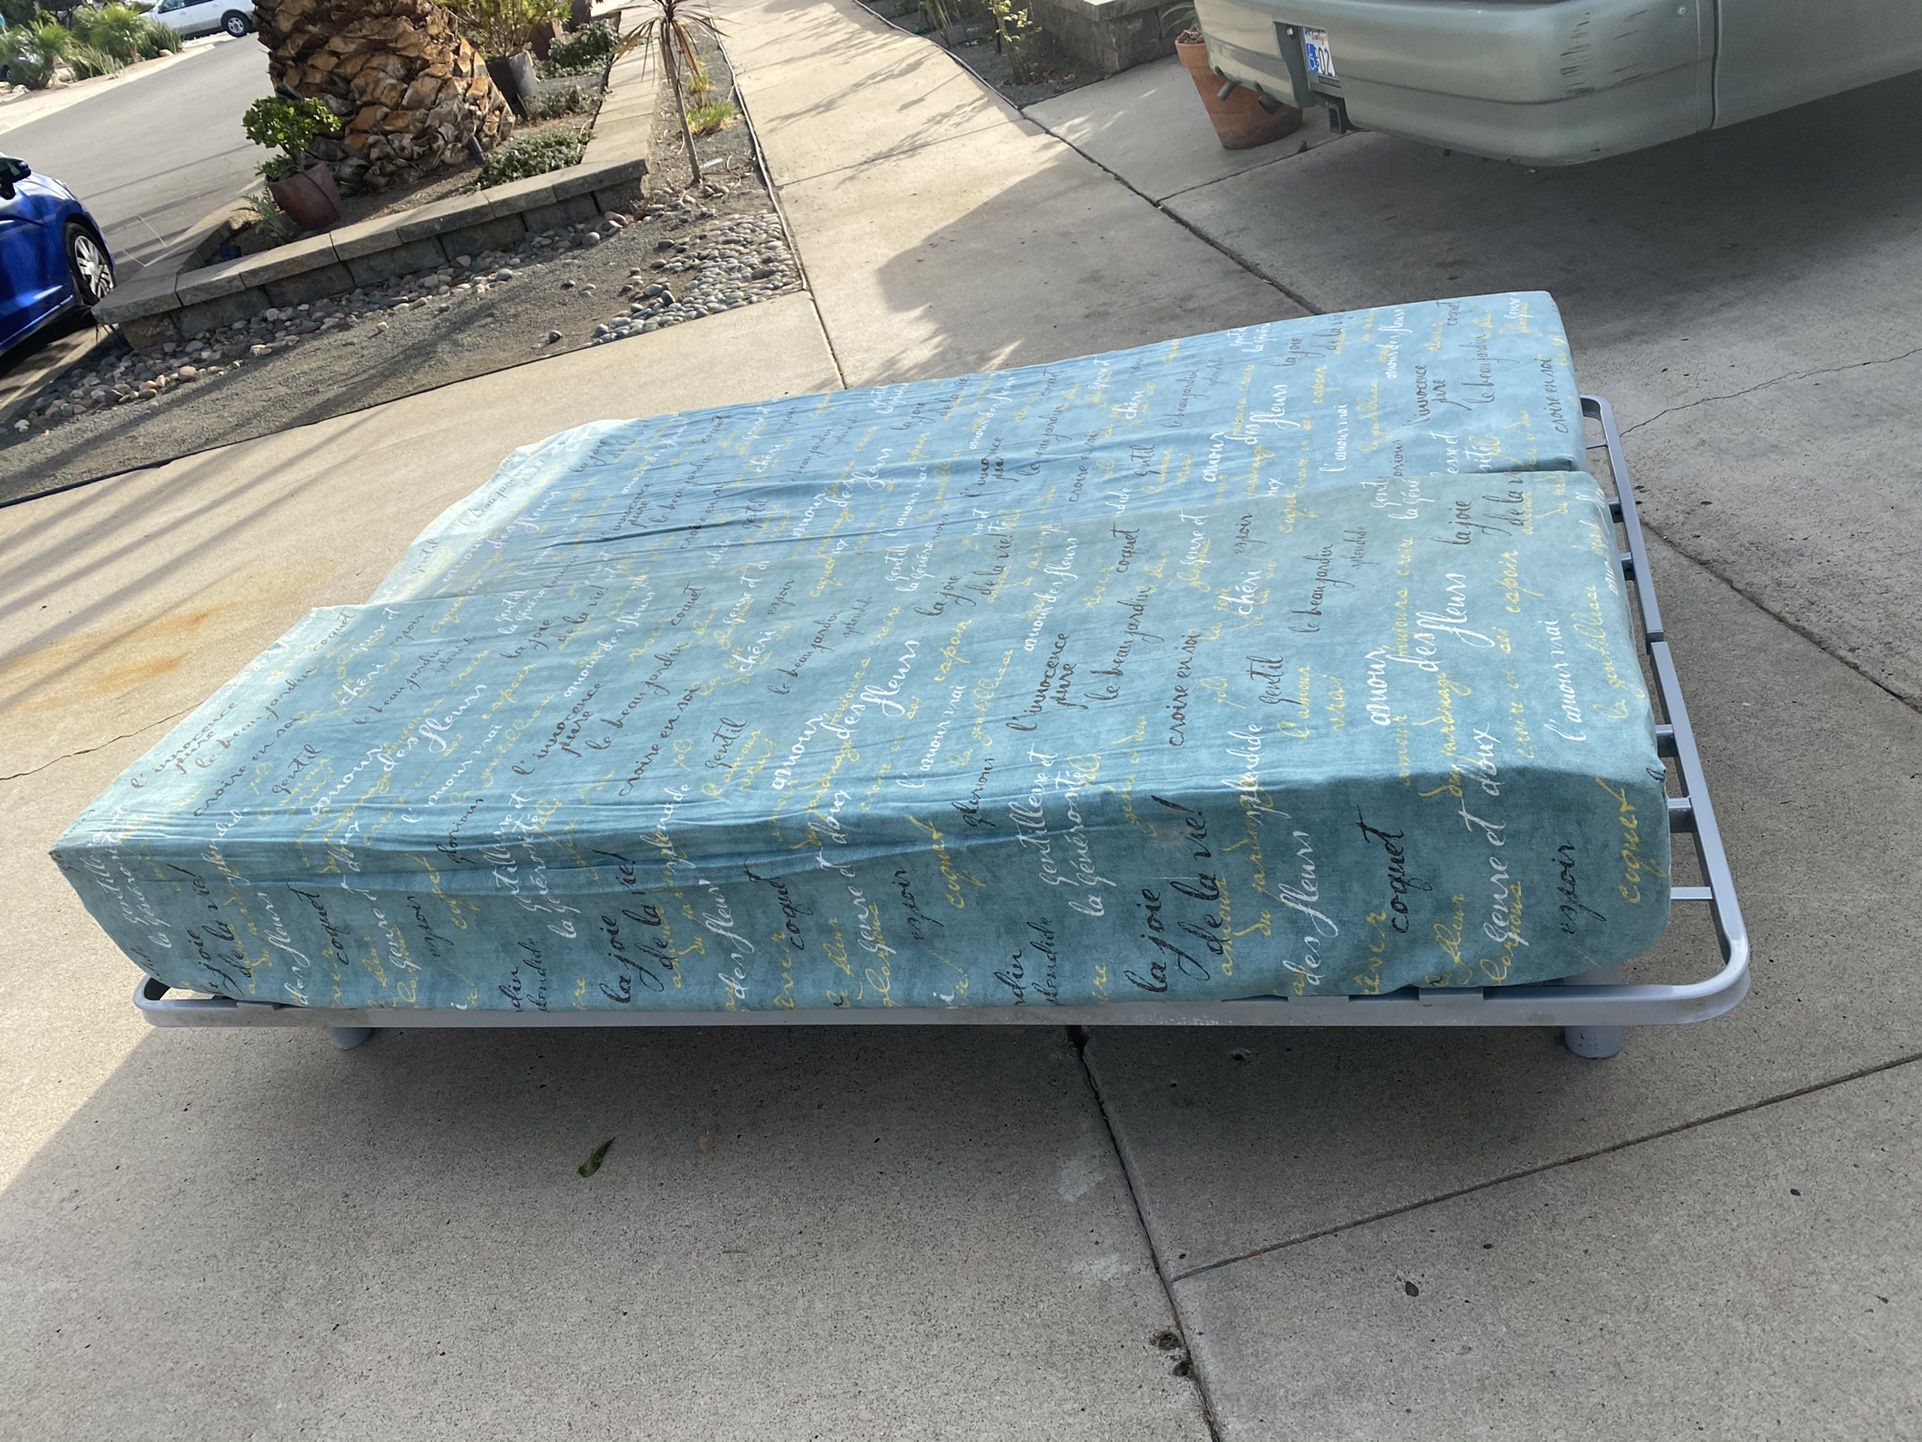 FREE -MUST pick up both: queen size futons and leather sectional couch